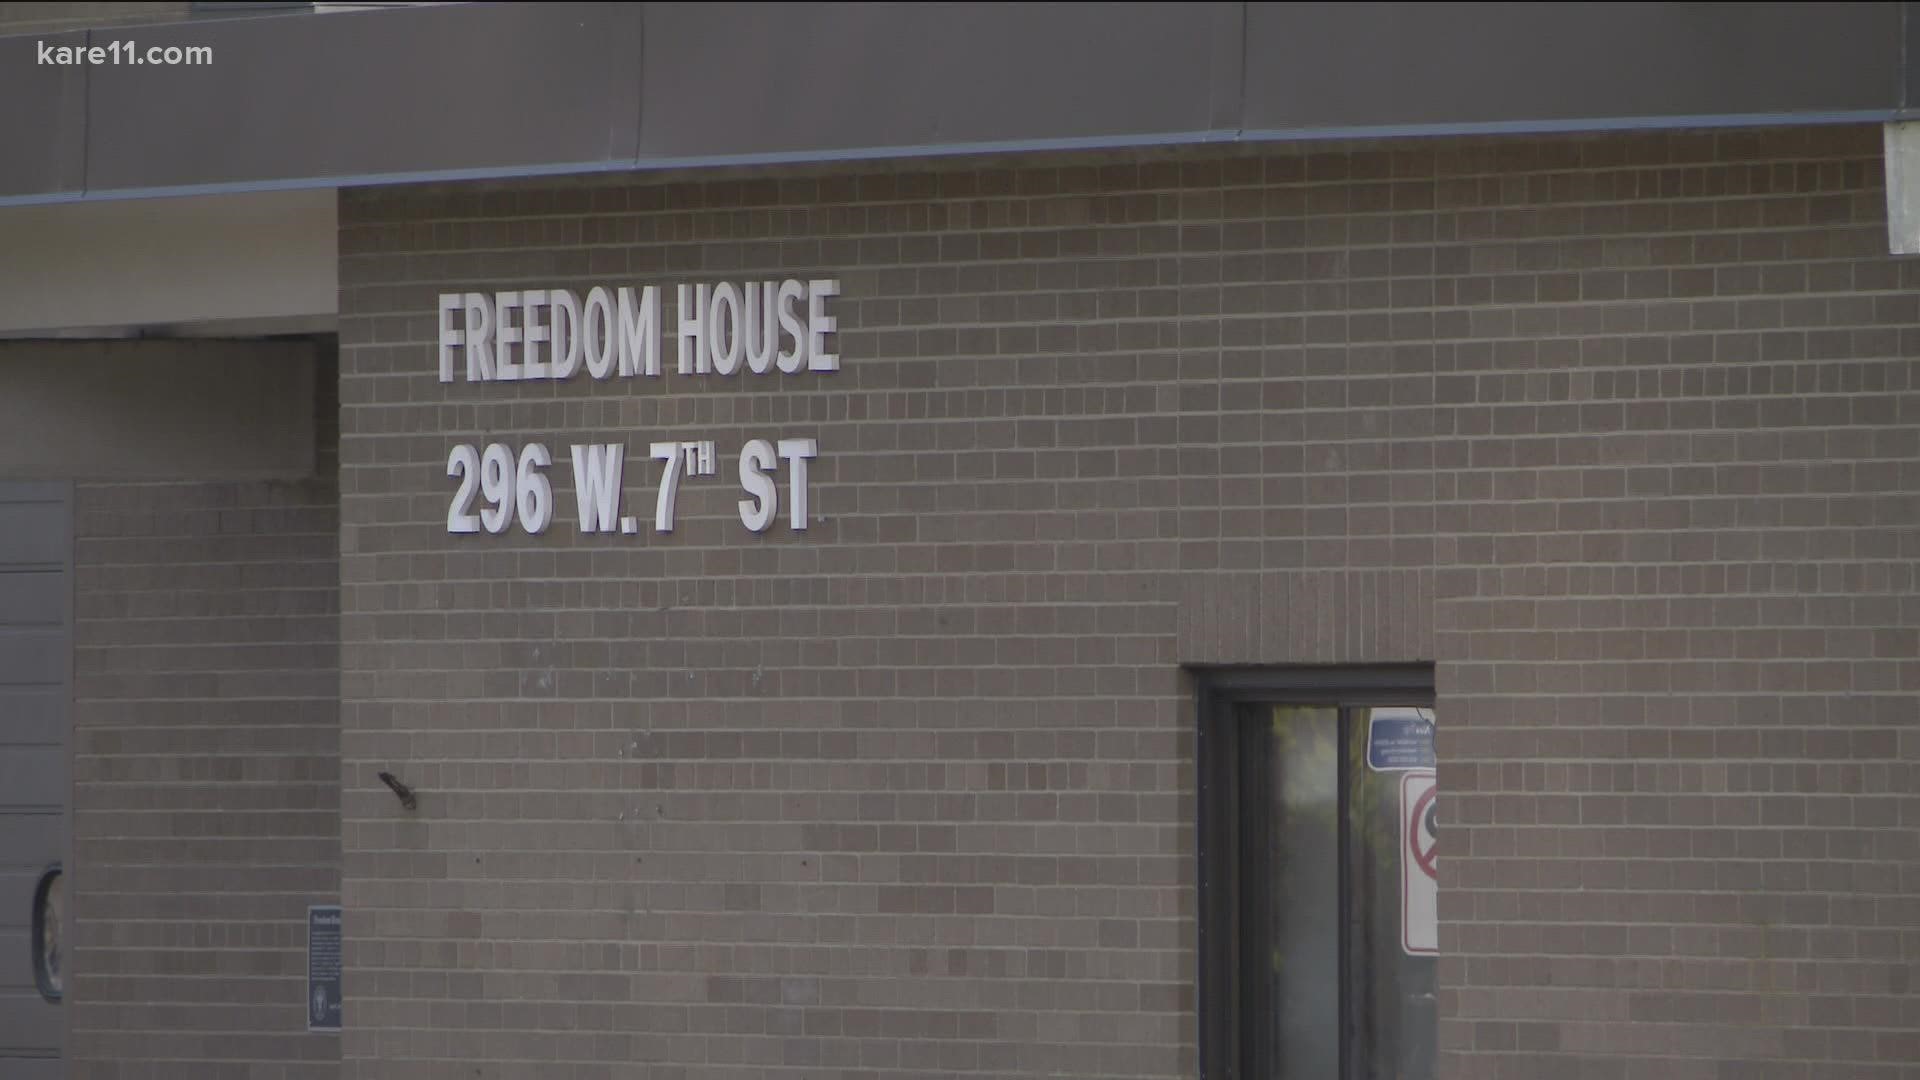 The ordinance allows shelters to operate in more areas of the city, despite opposition from a coalition of businesses who've sued over the presence of Freedom House.